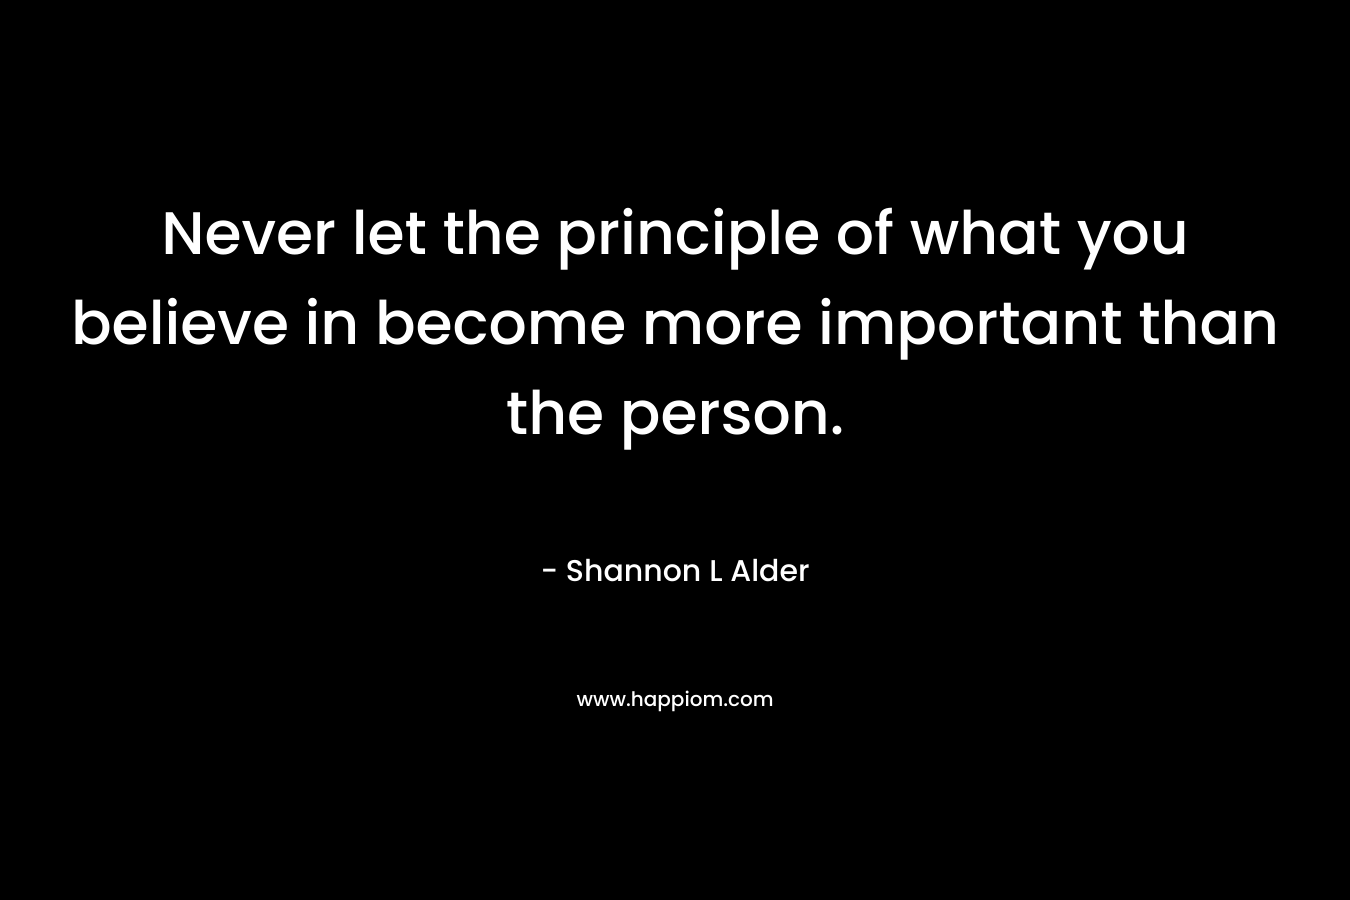 Never let the principle of what you believe in become more important than the person.